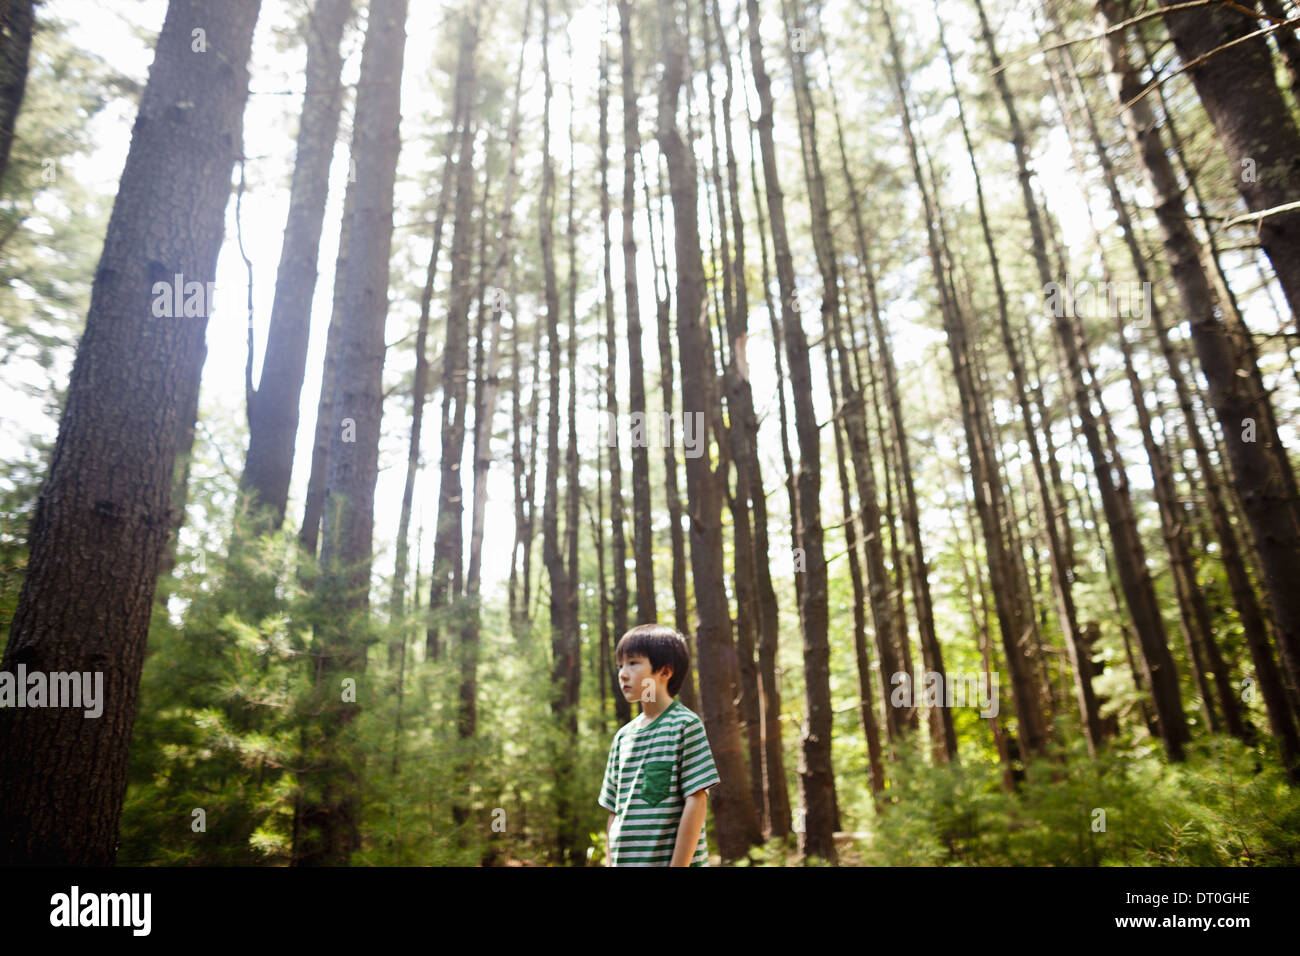 Woodstock New York USA young boy playing in the pine forest tree trunks Stock Photo